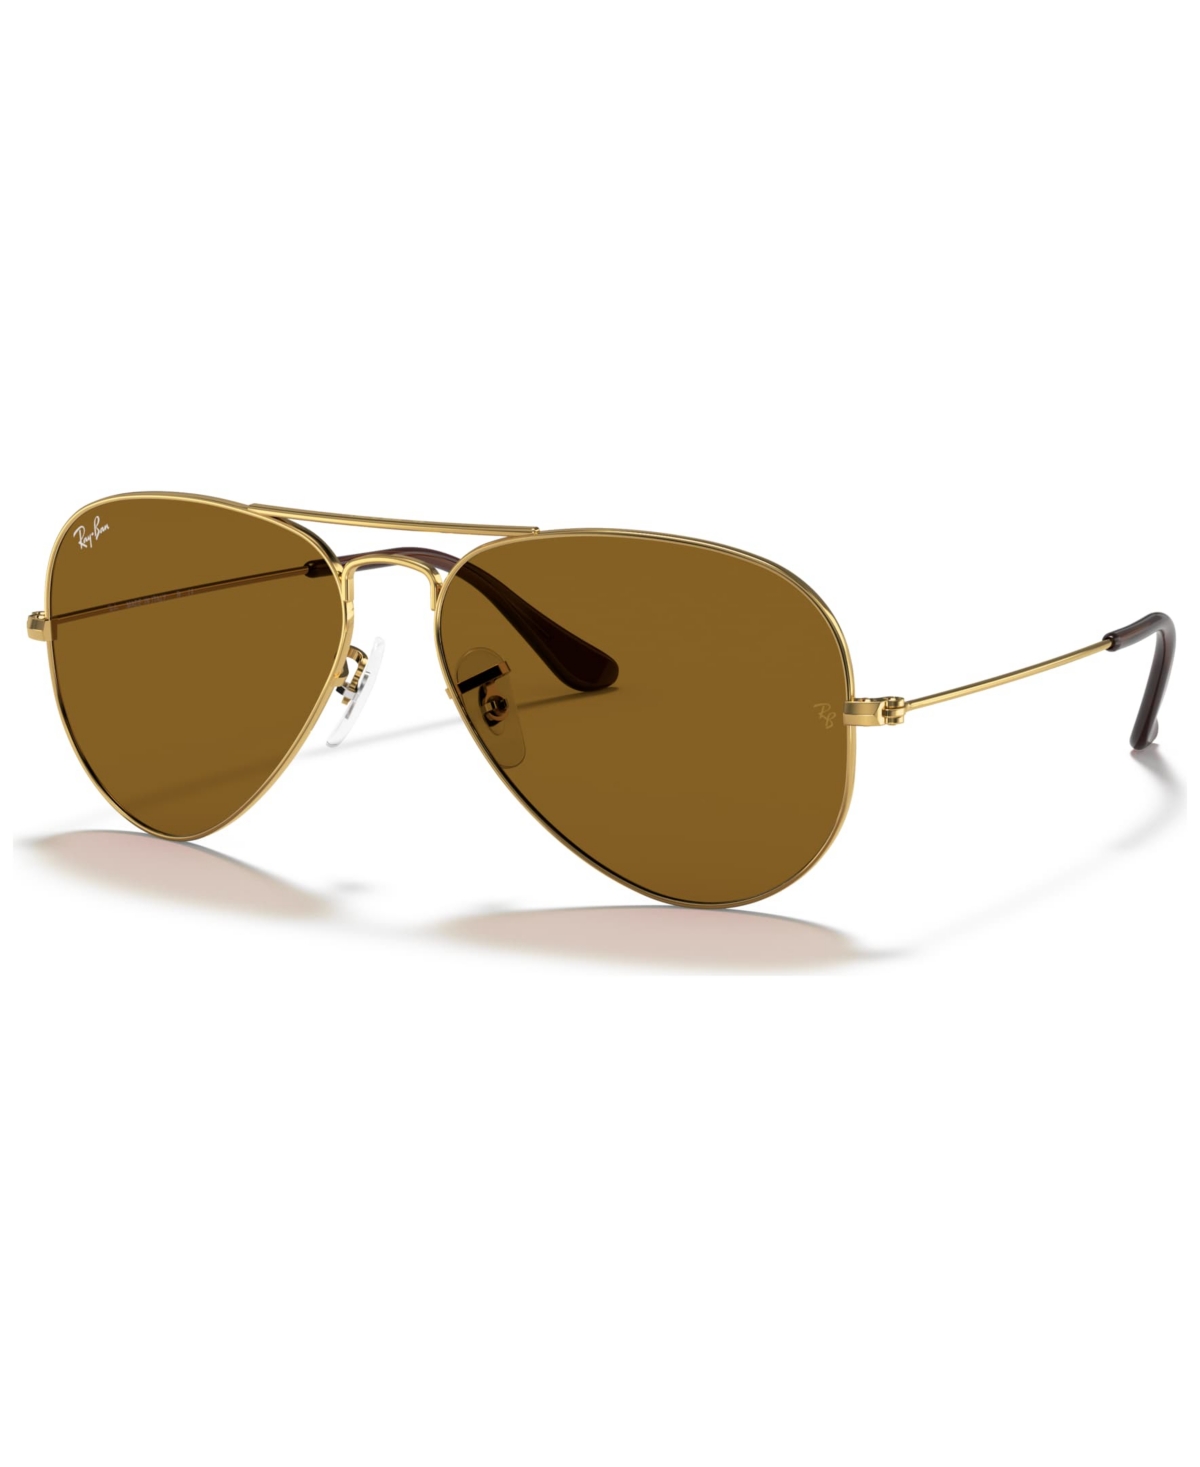 Ray Ban Sunglasses, Rb3025 Aviator Classic In Gold,brown